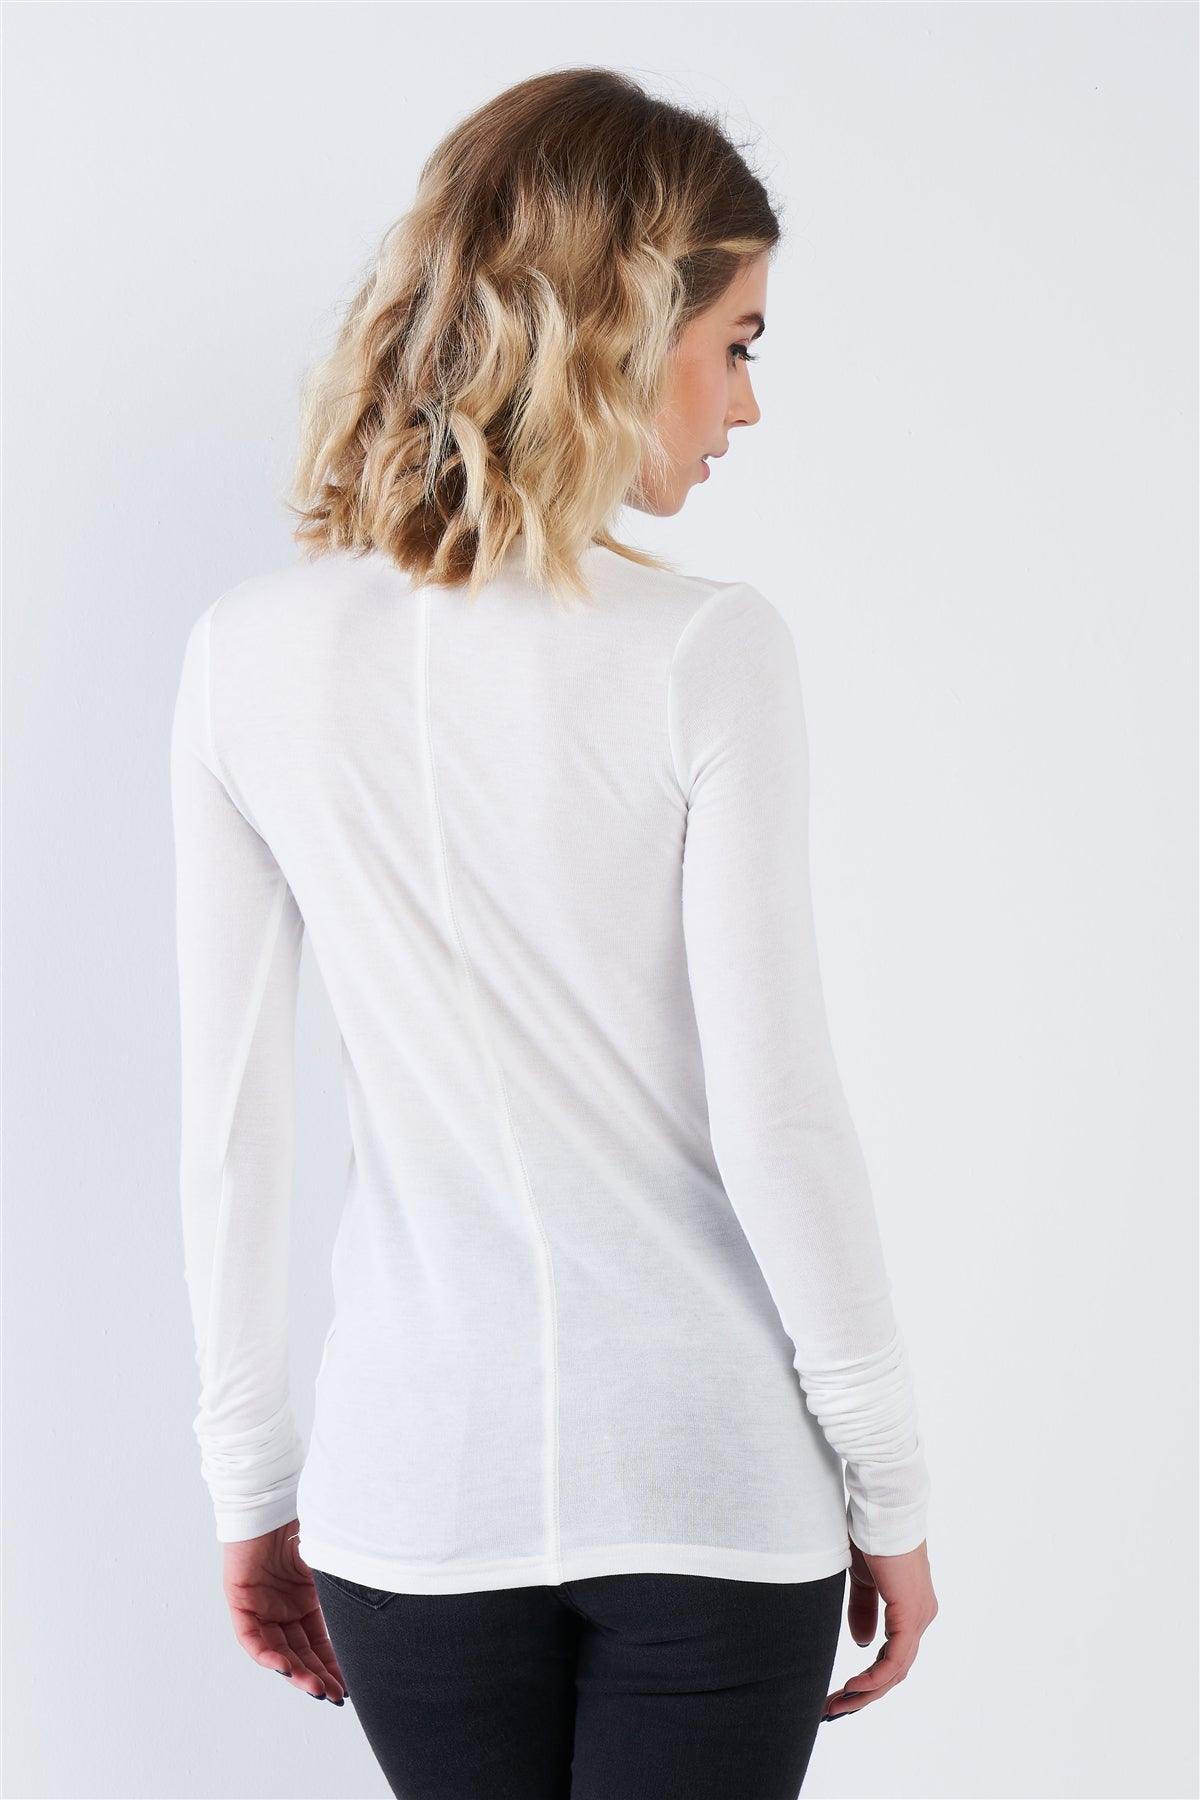 Off-White Casual Basic Long Sleeve Stretchy Bodycon Top